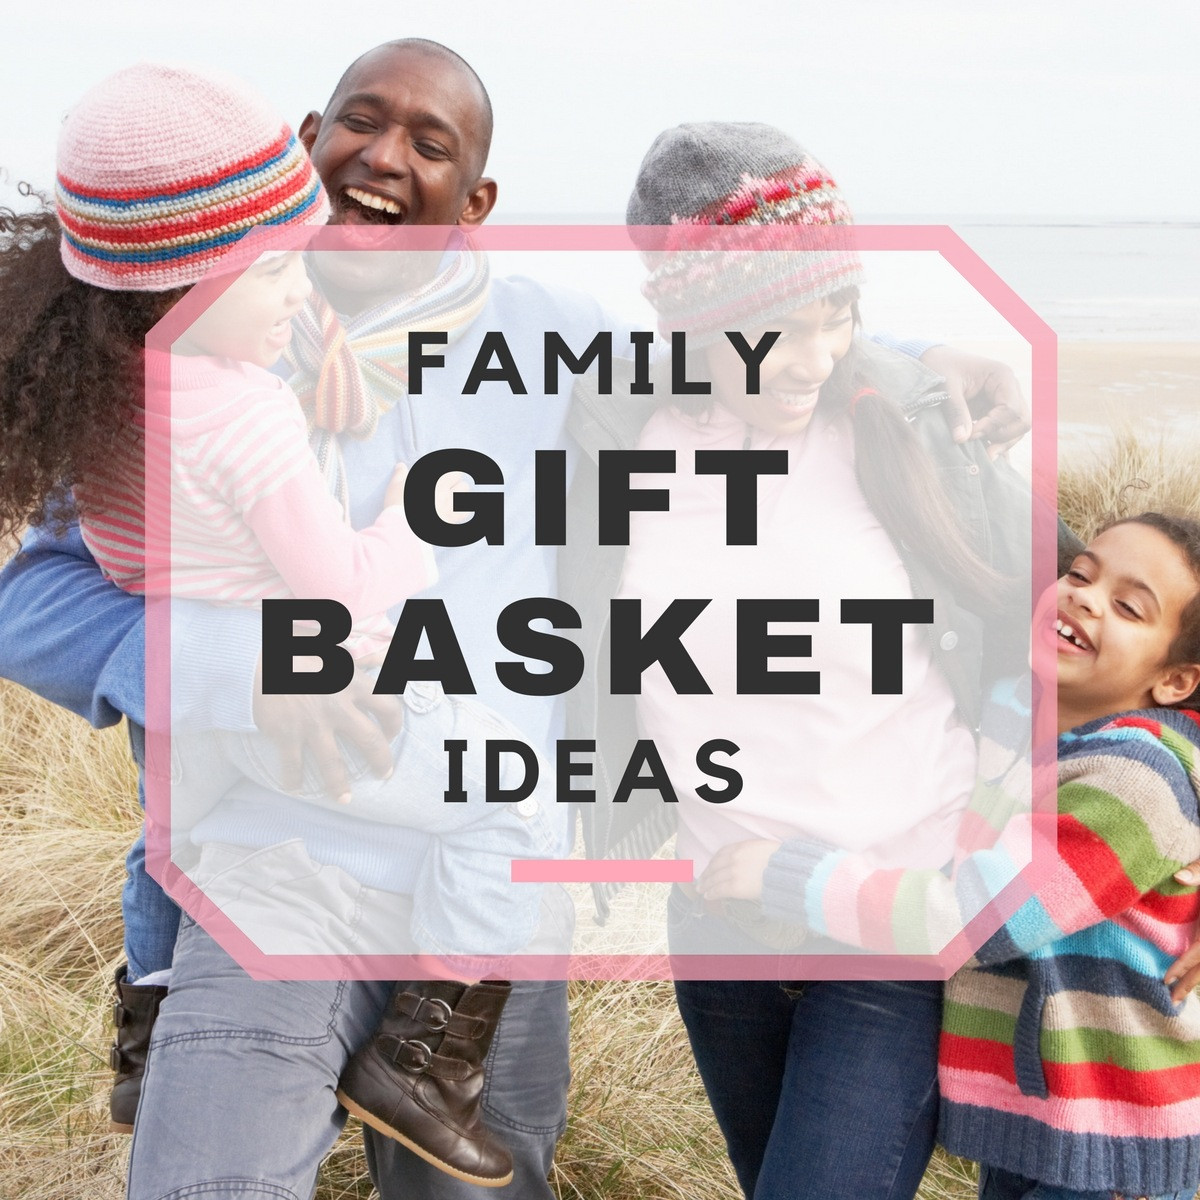 Gifts For Families With Kids
 10 Best Family Gift Basket Ideas